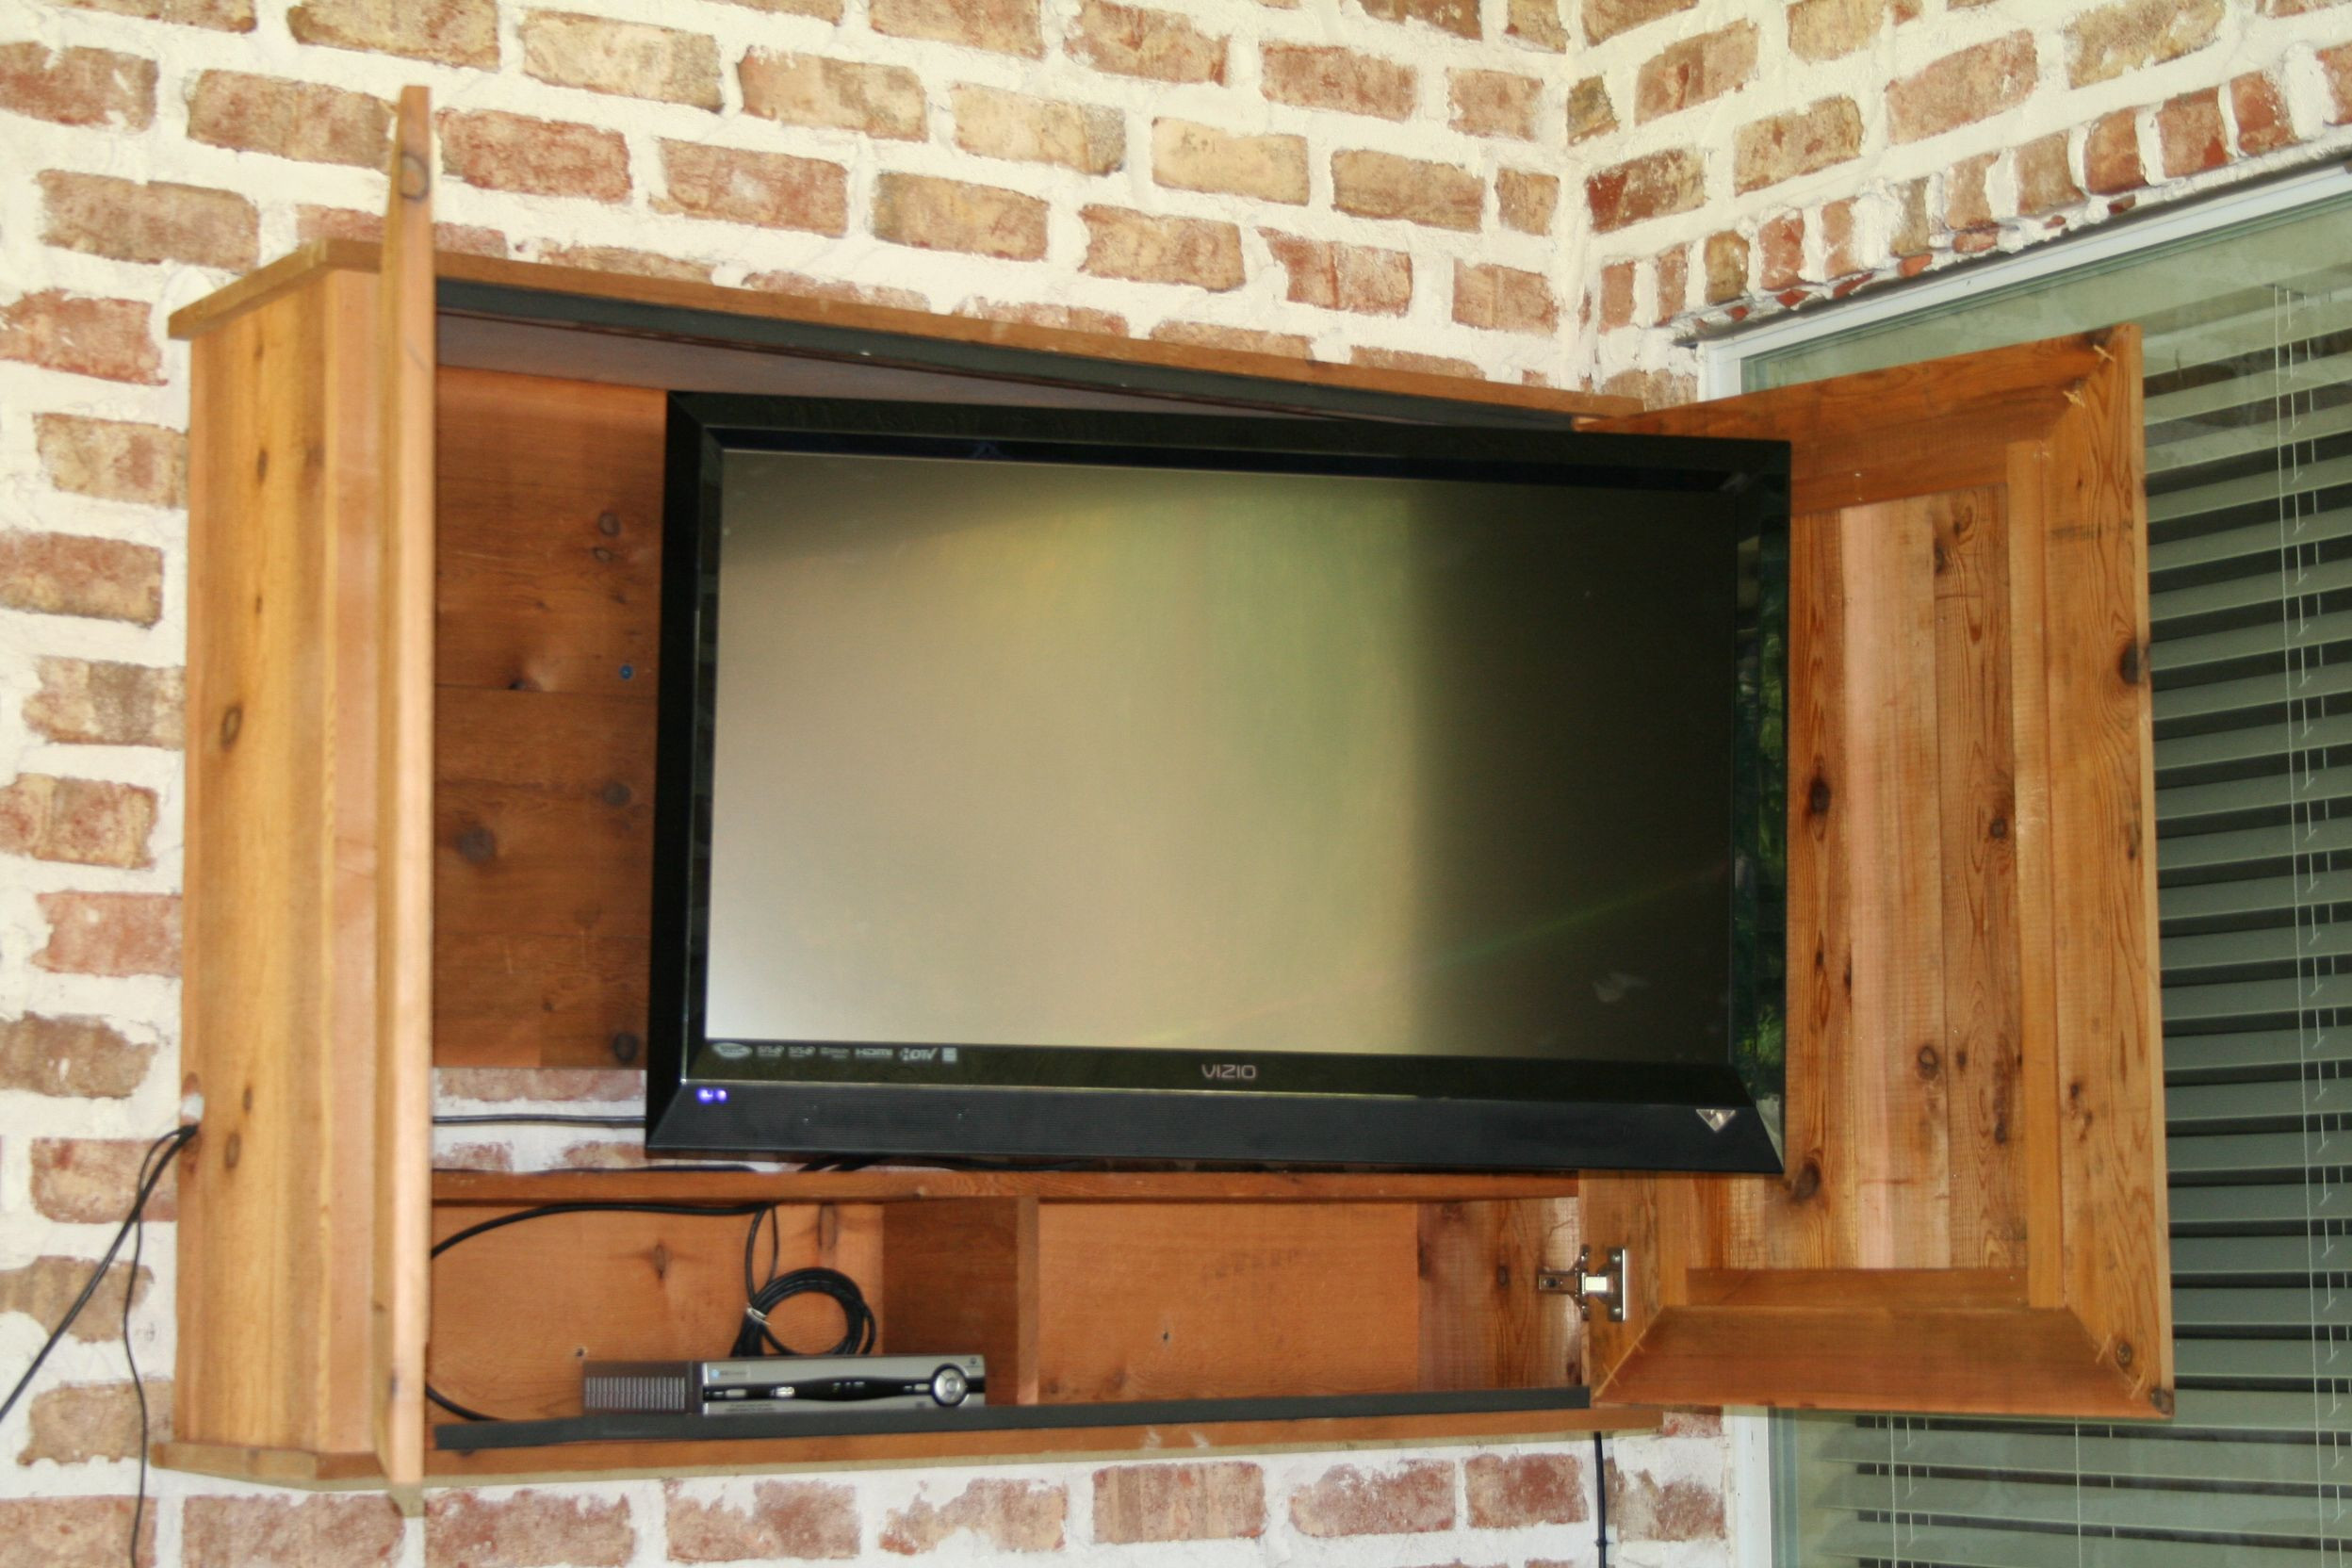 DIY Outdoor Tv Cabinet Plans
 Outdoor TV cabinet for the patio